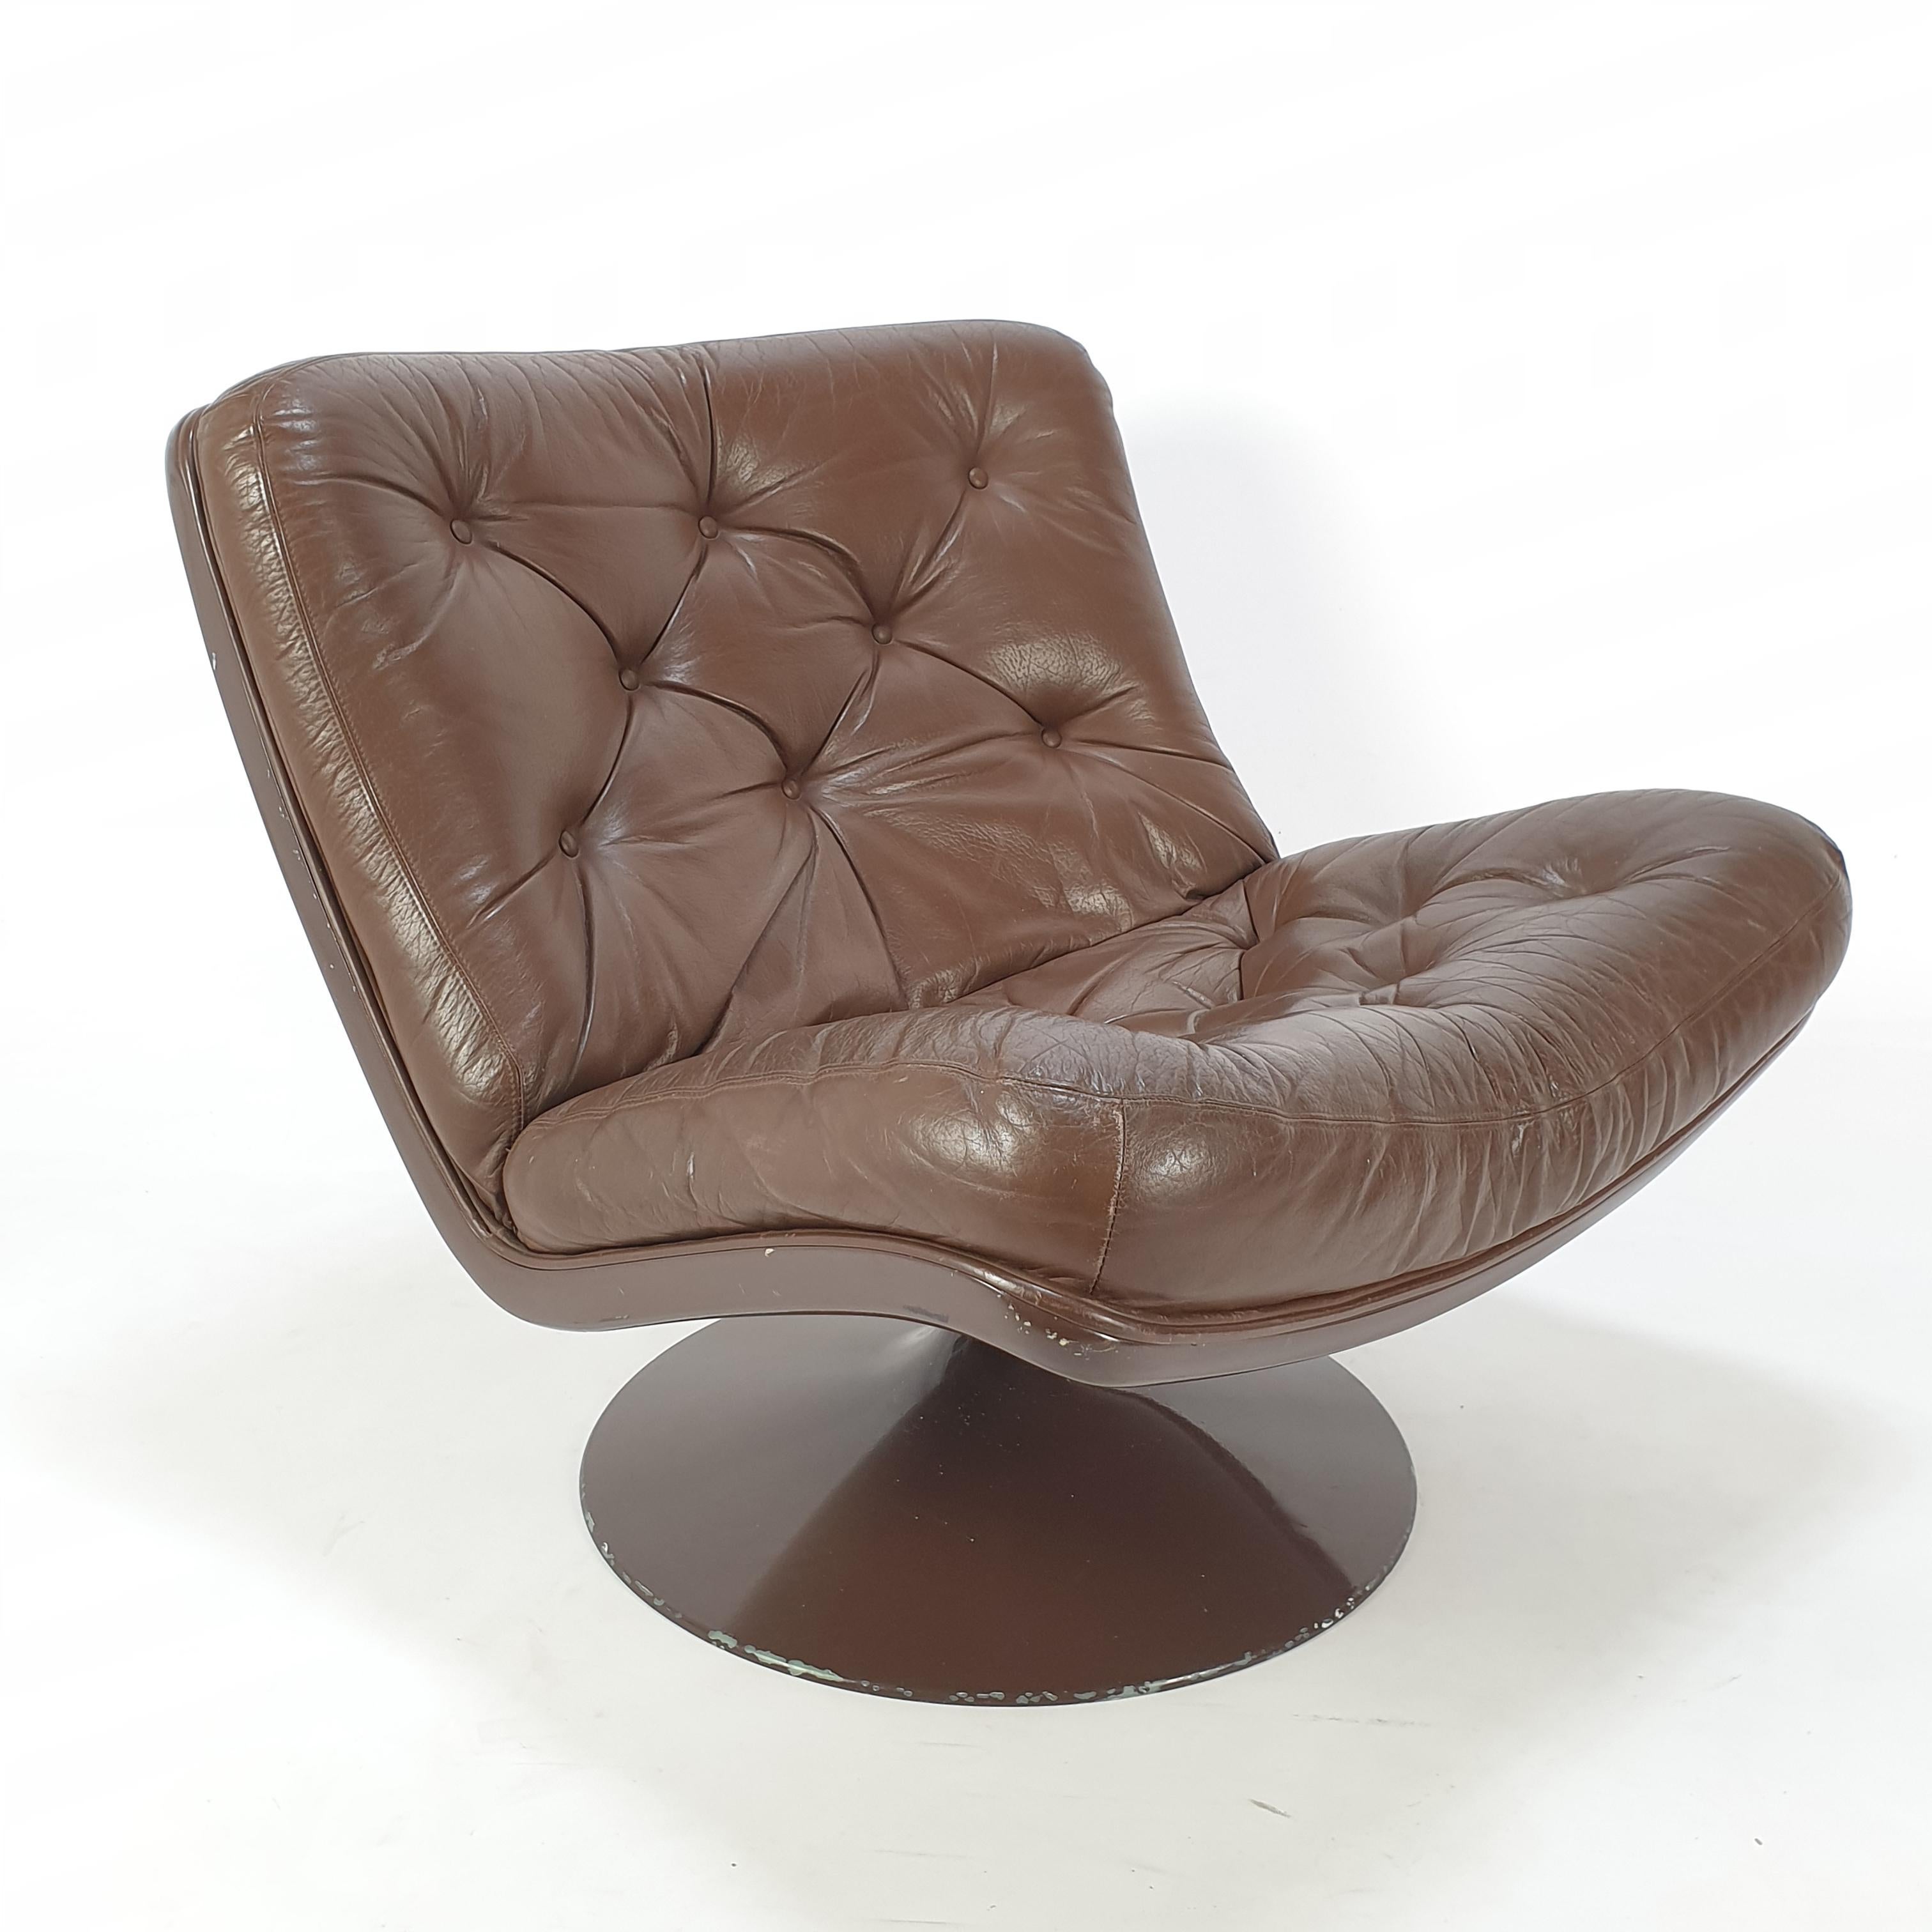 Very comfortable lounge chair designed by Geoffrey Harcourt for Artifort in the 60's. It has a rotating foot. Original brown leather with nice patina.